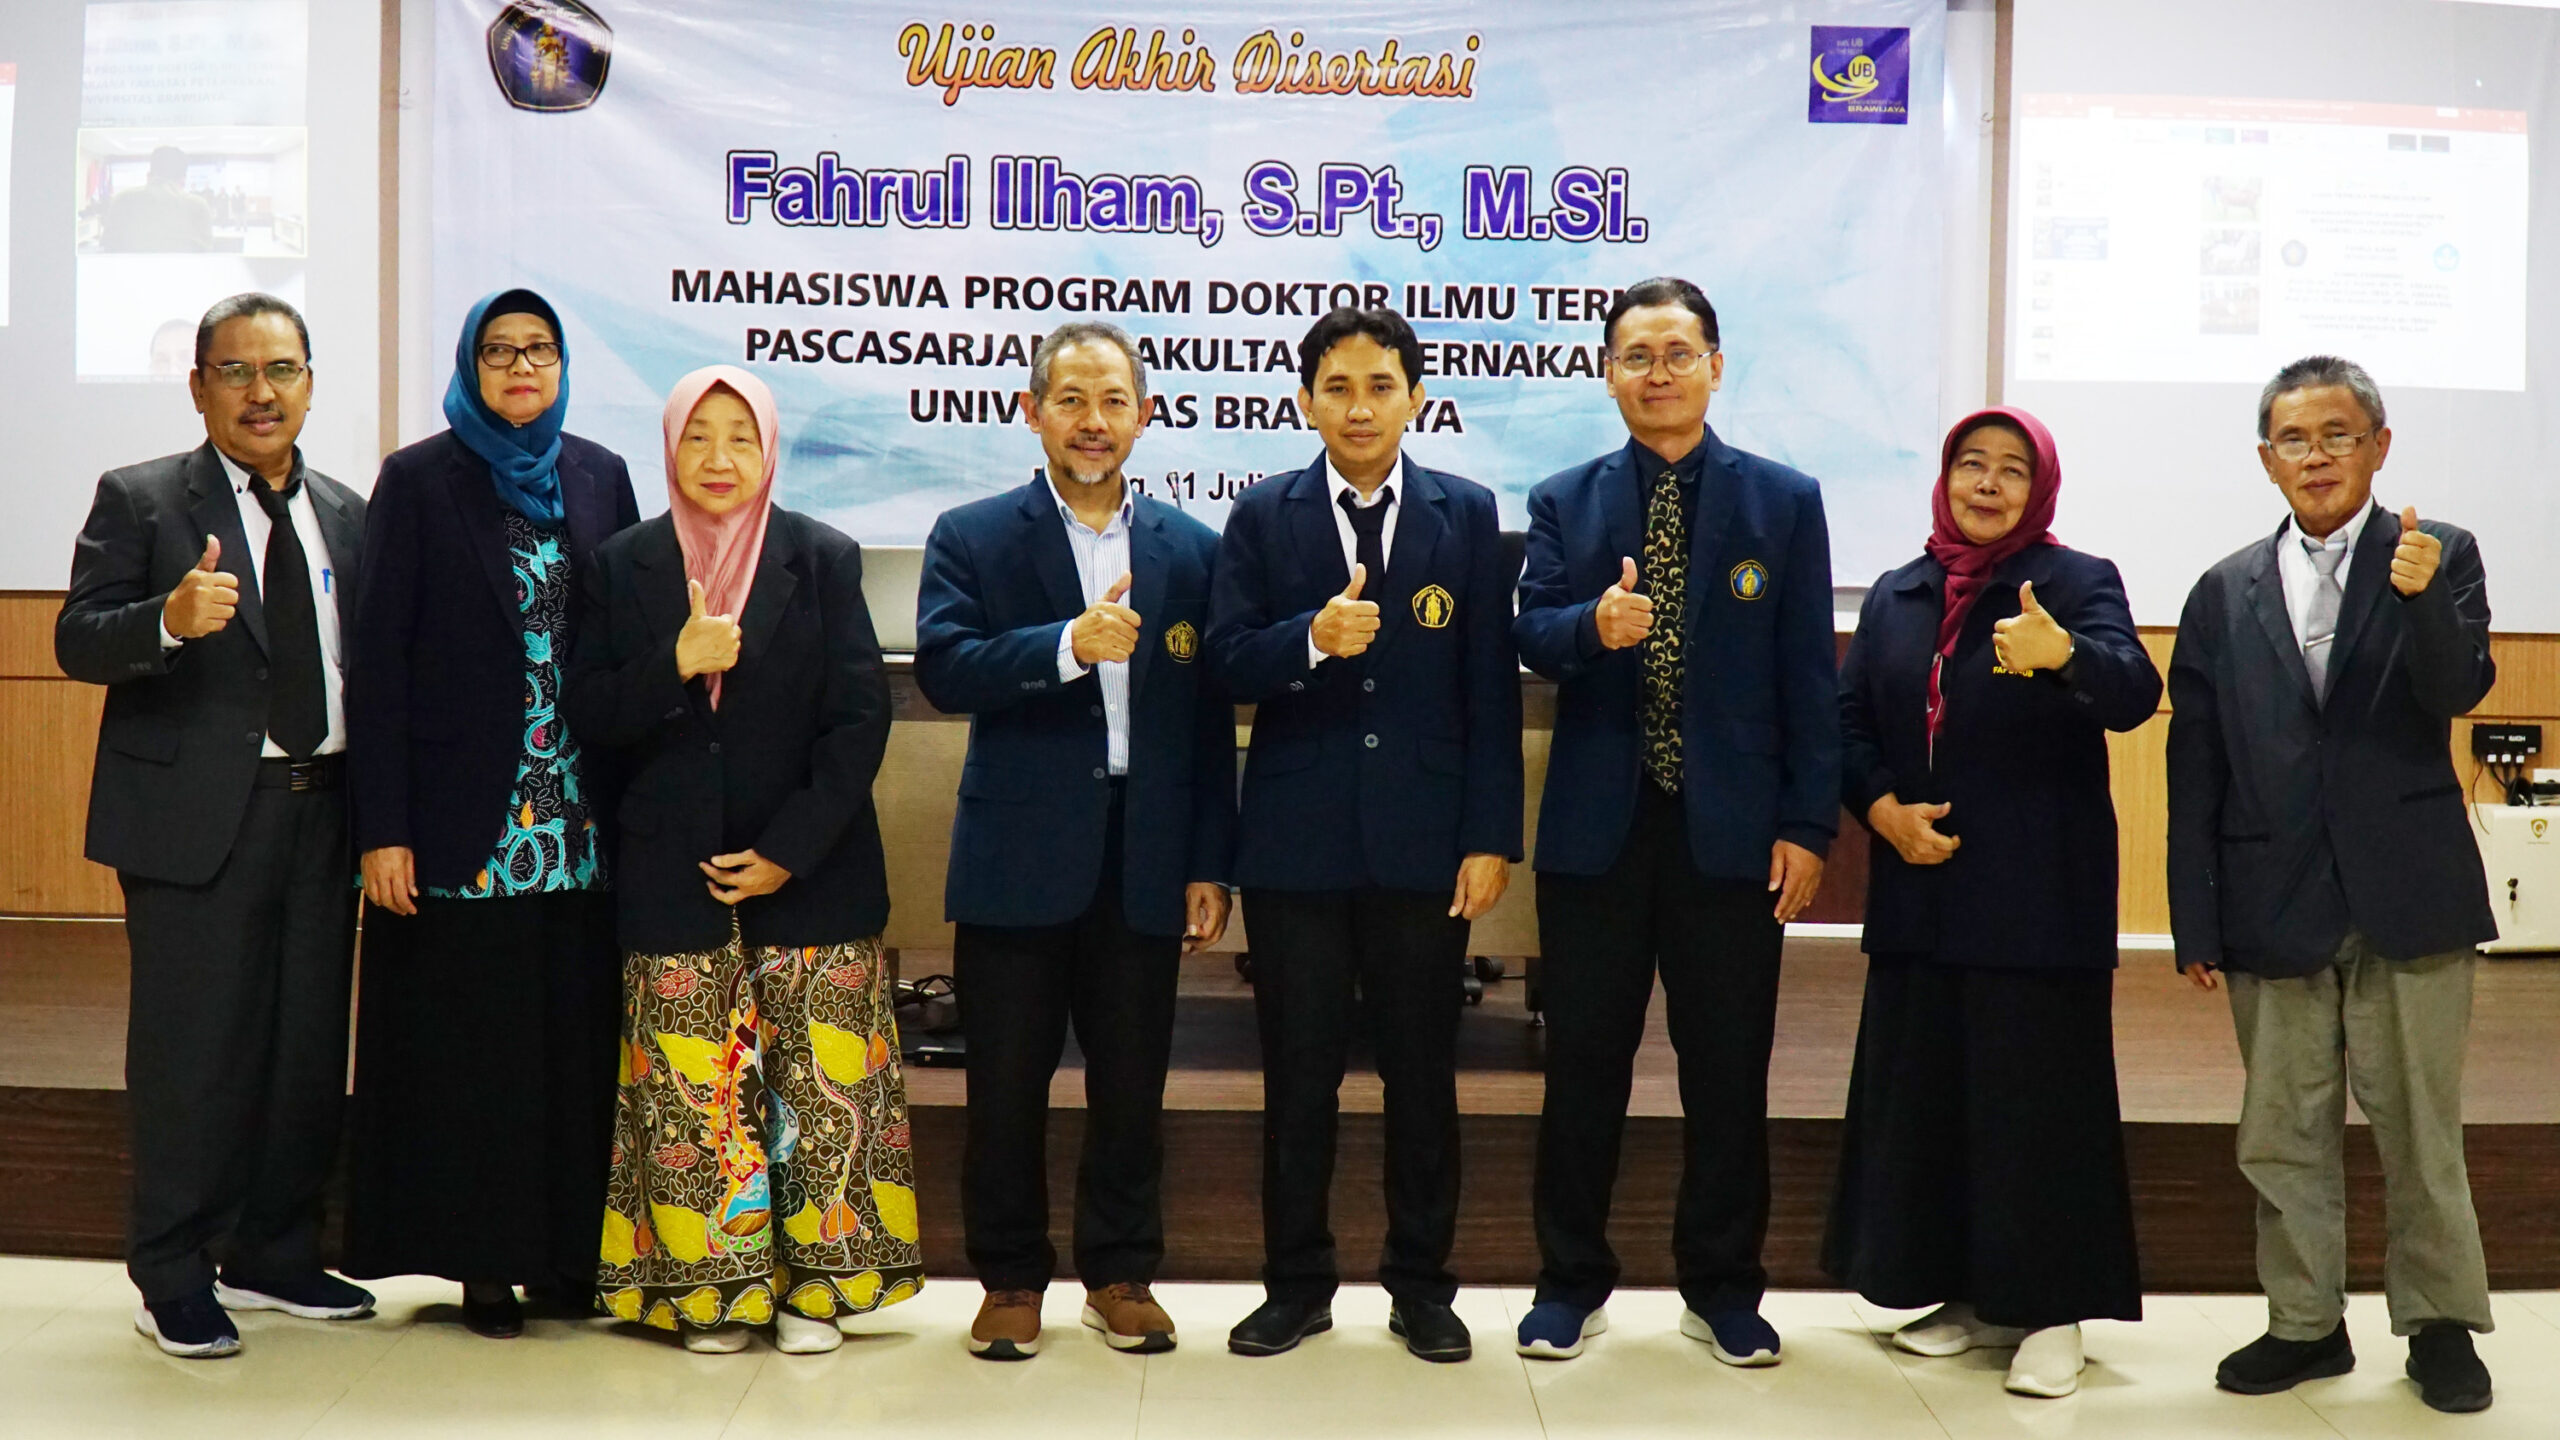 Dissertation of Fahrul Ilham, S.Pt., M.Sc. : Character and Phenotypic & Genetic Diversity of Local Gorontalo Goats